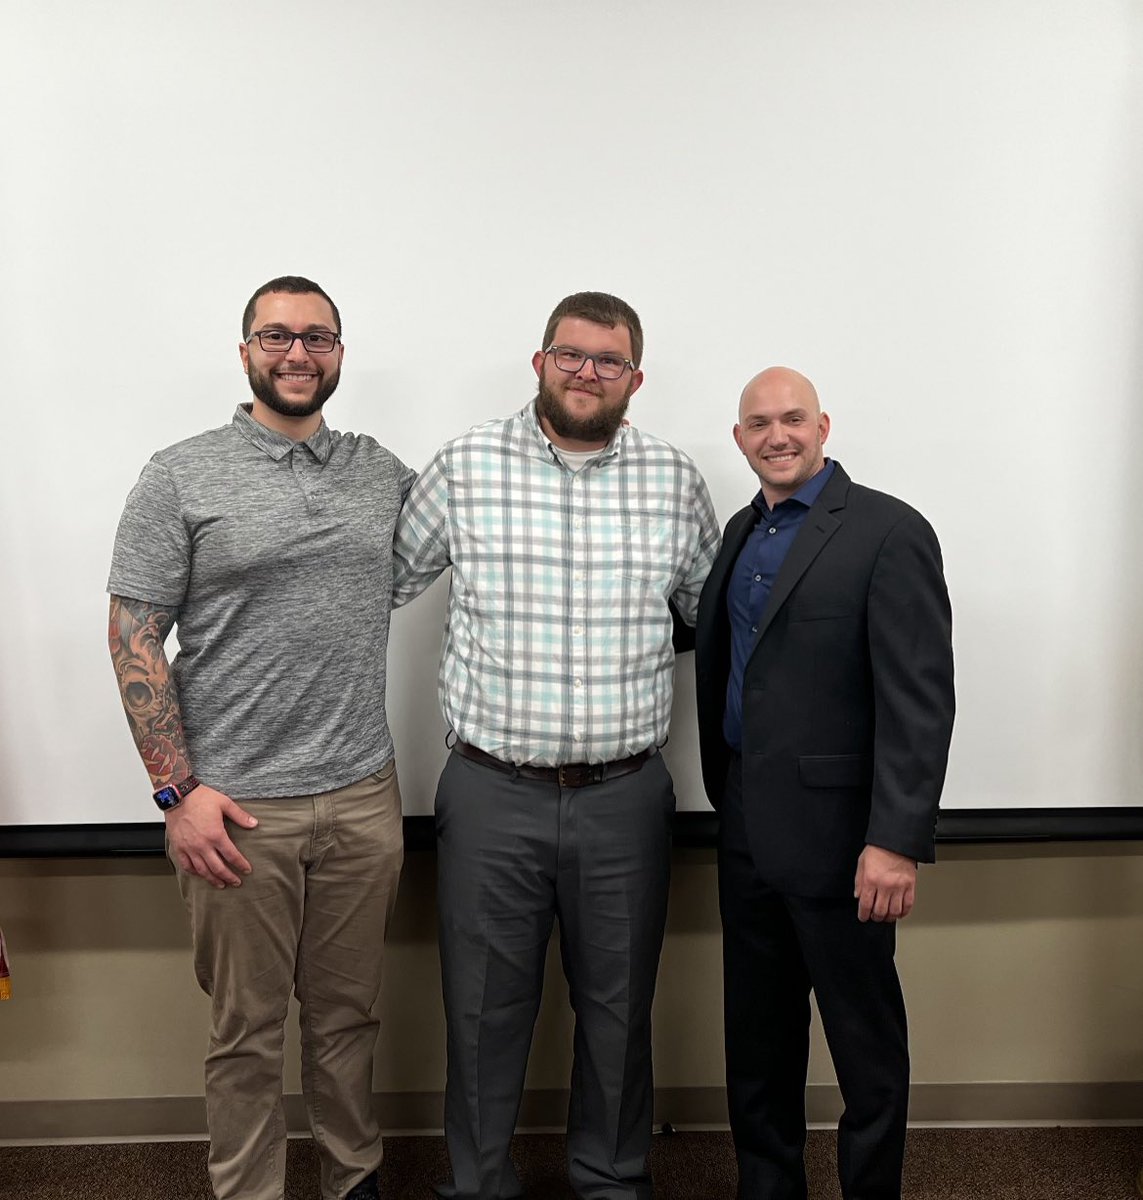 We would like to introduce the newest members of our center! From L-R: Dispatcher Tom Piantedosi, Dispatcher John Corbett and Dispatcher Michael Barry. These new dispatchers are going through out 15week on the floor training with our CTOs. Welcome to the team!!